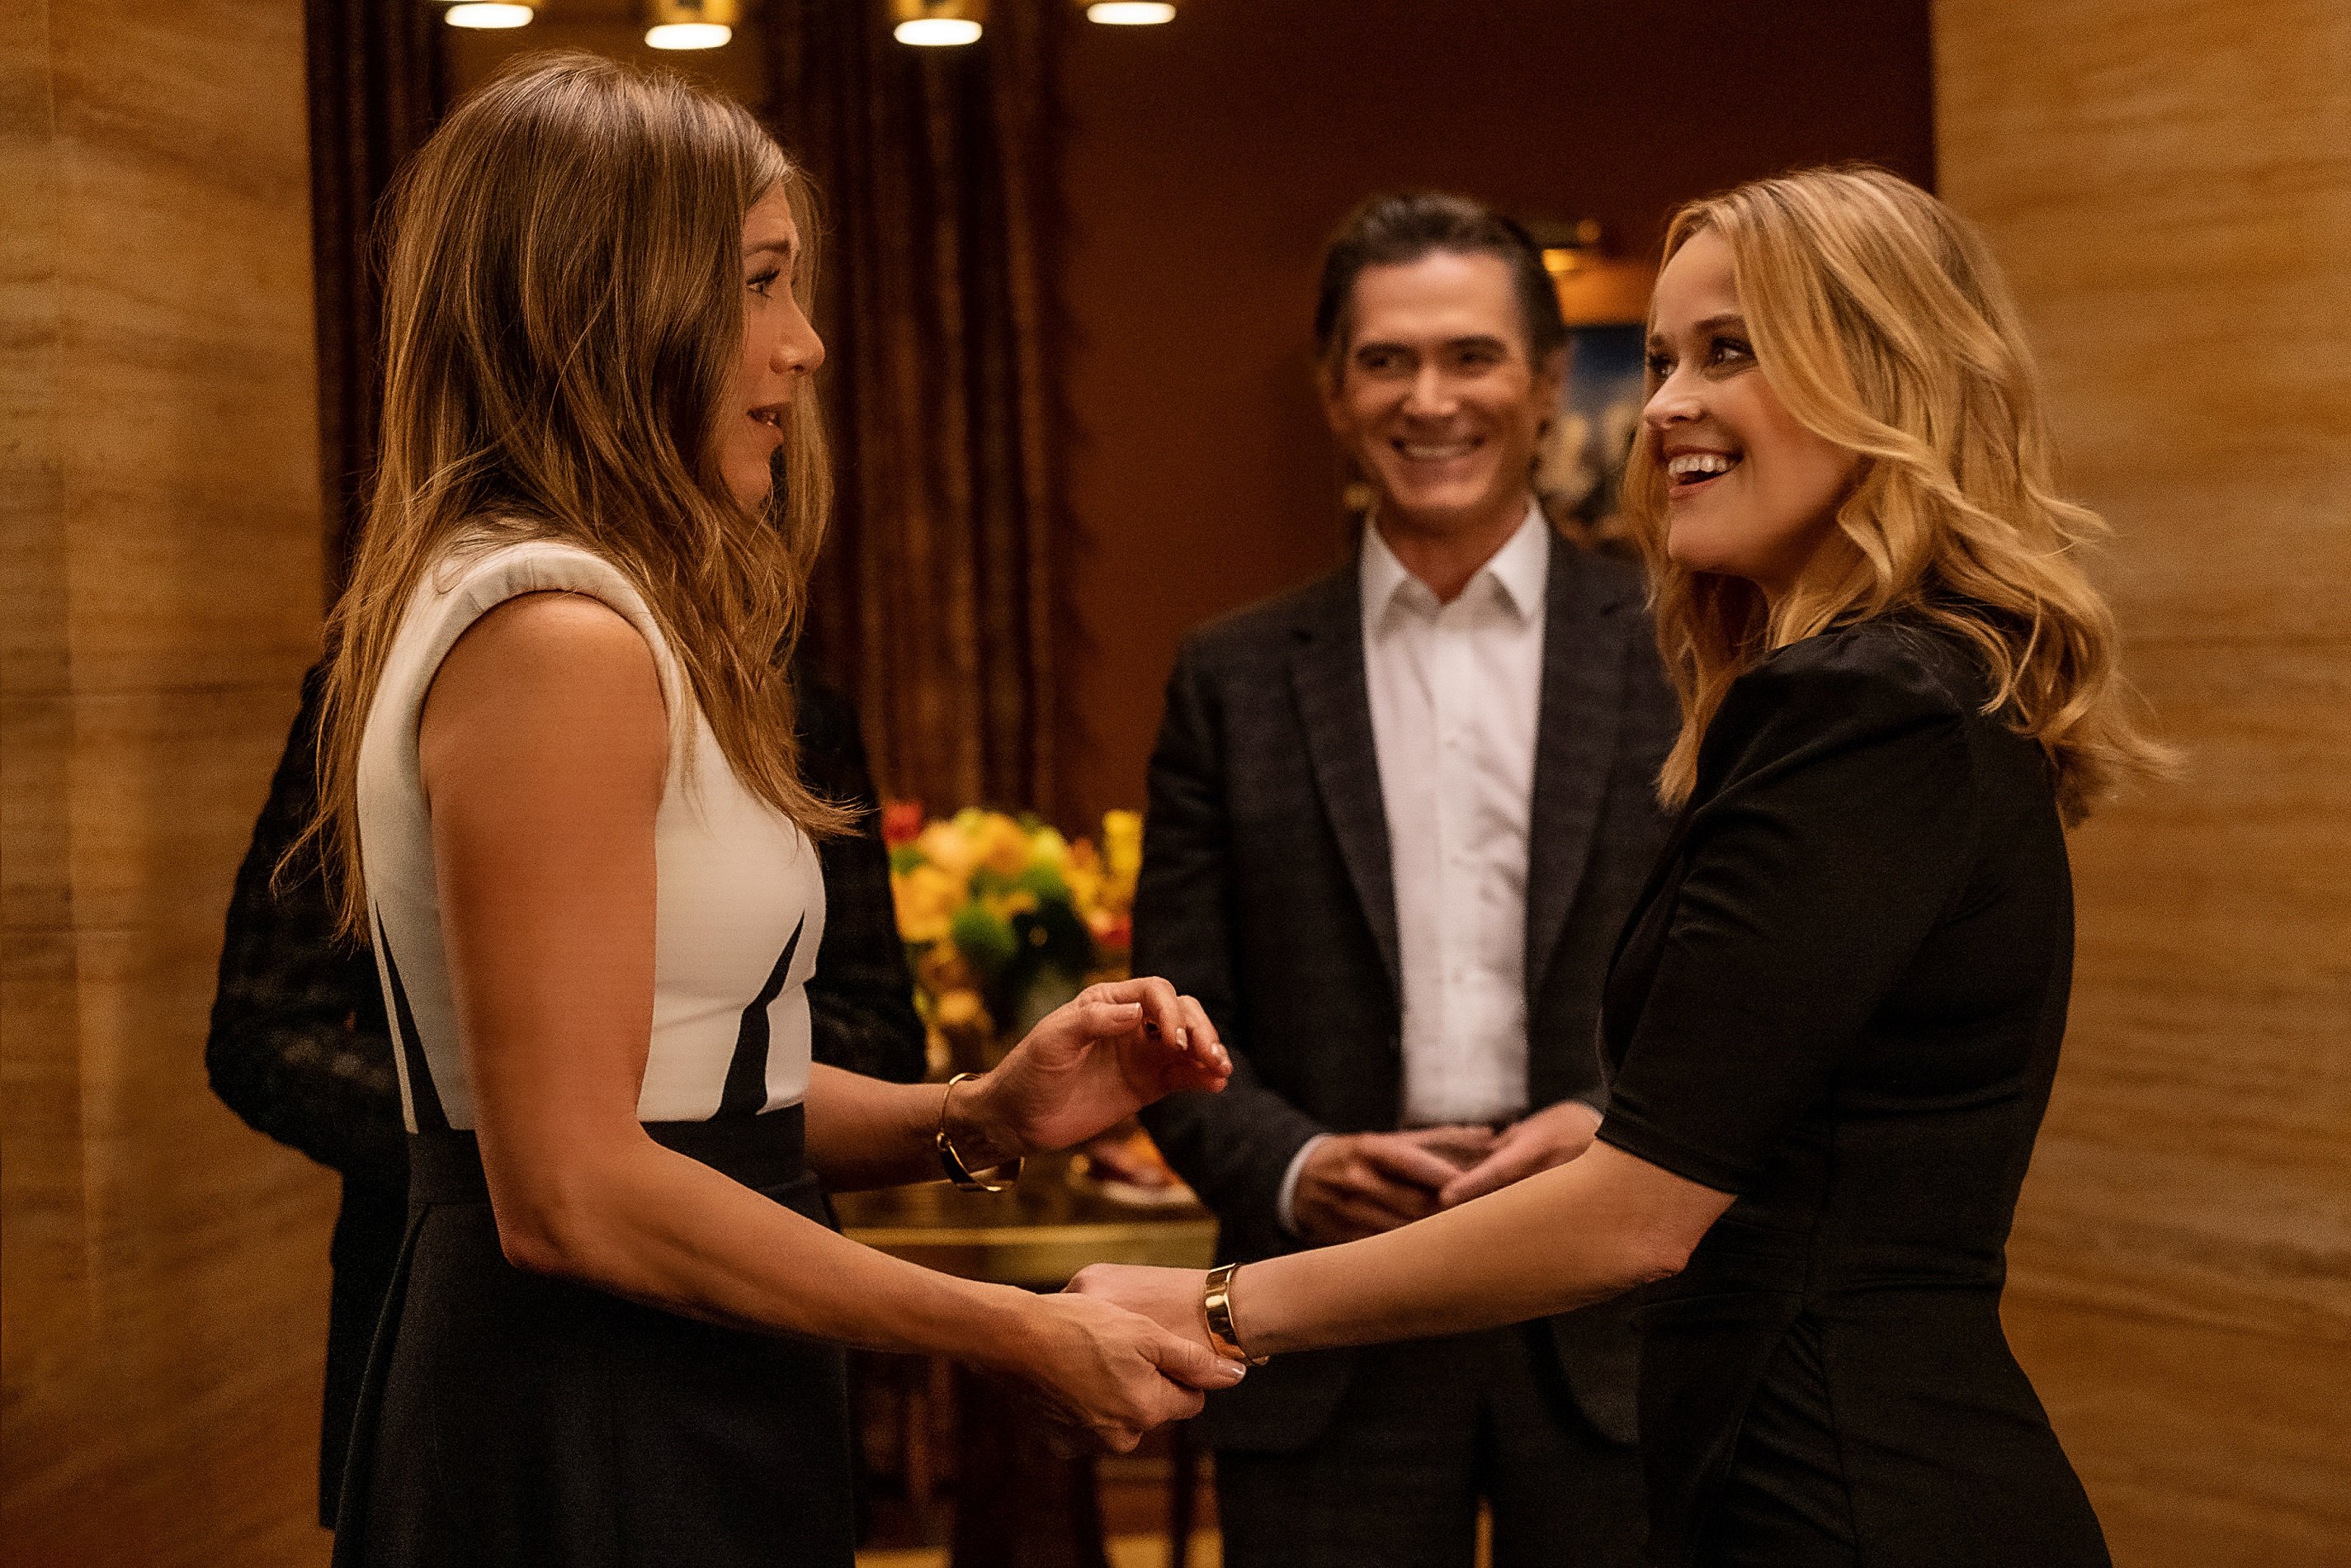 The Morning Show stars Jennifer Aniston, Billy Crudup and Reese Witherspoon acting in season 2